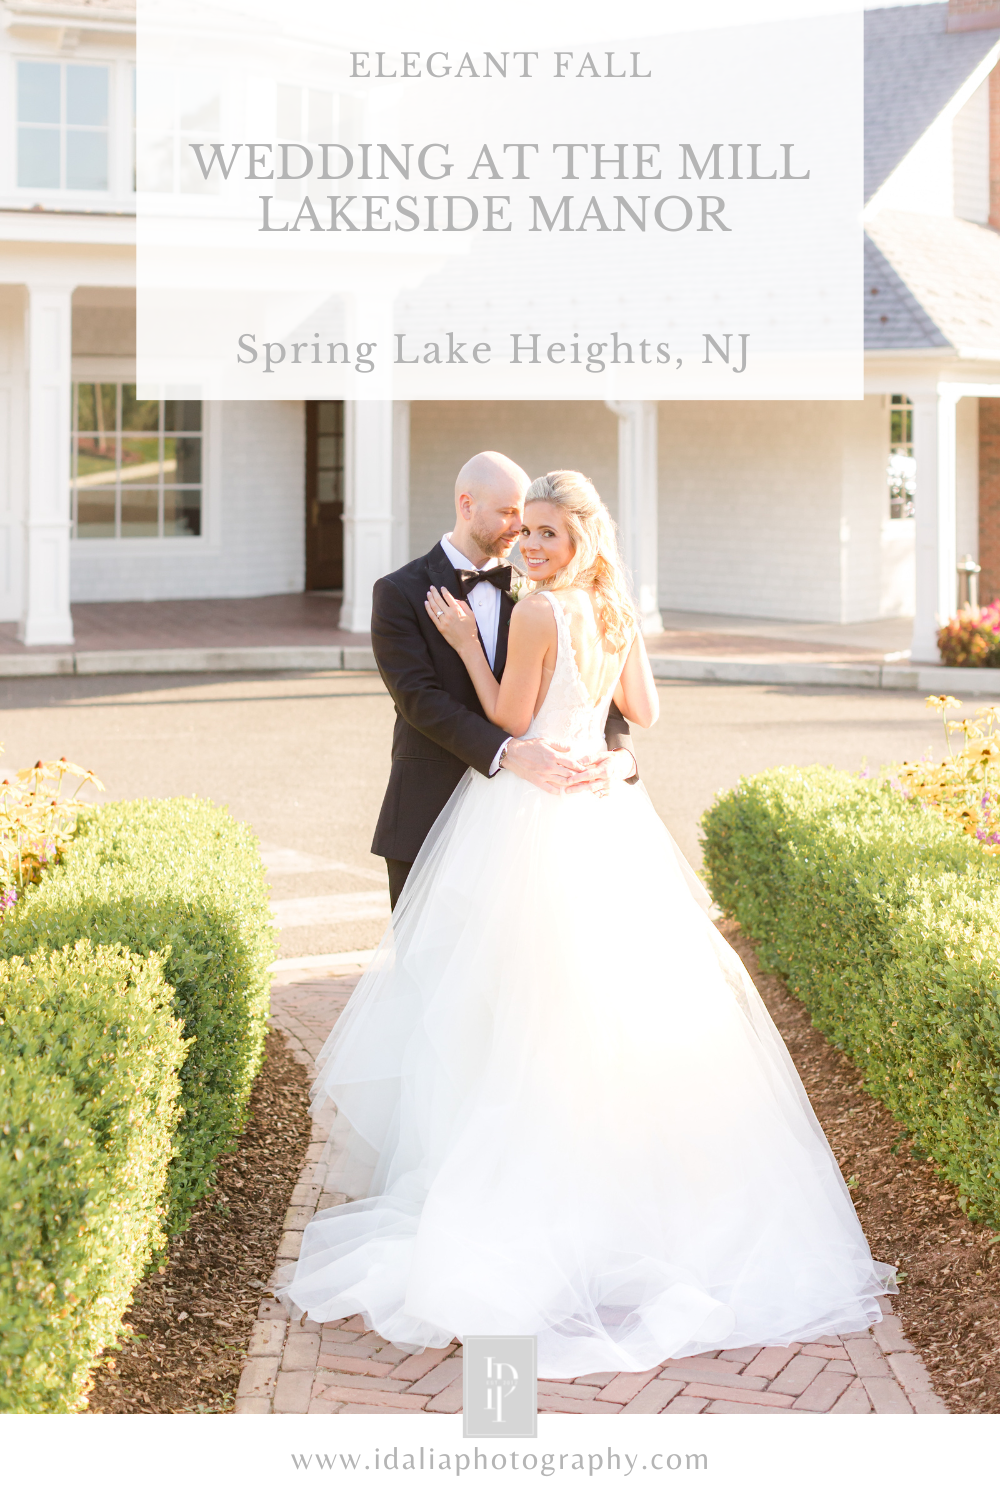 Elegant fall wedding at The Mill Lakeside Manor in New Jersey photographed by NJ wedding photographer Idalia Photography